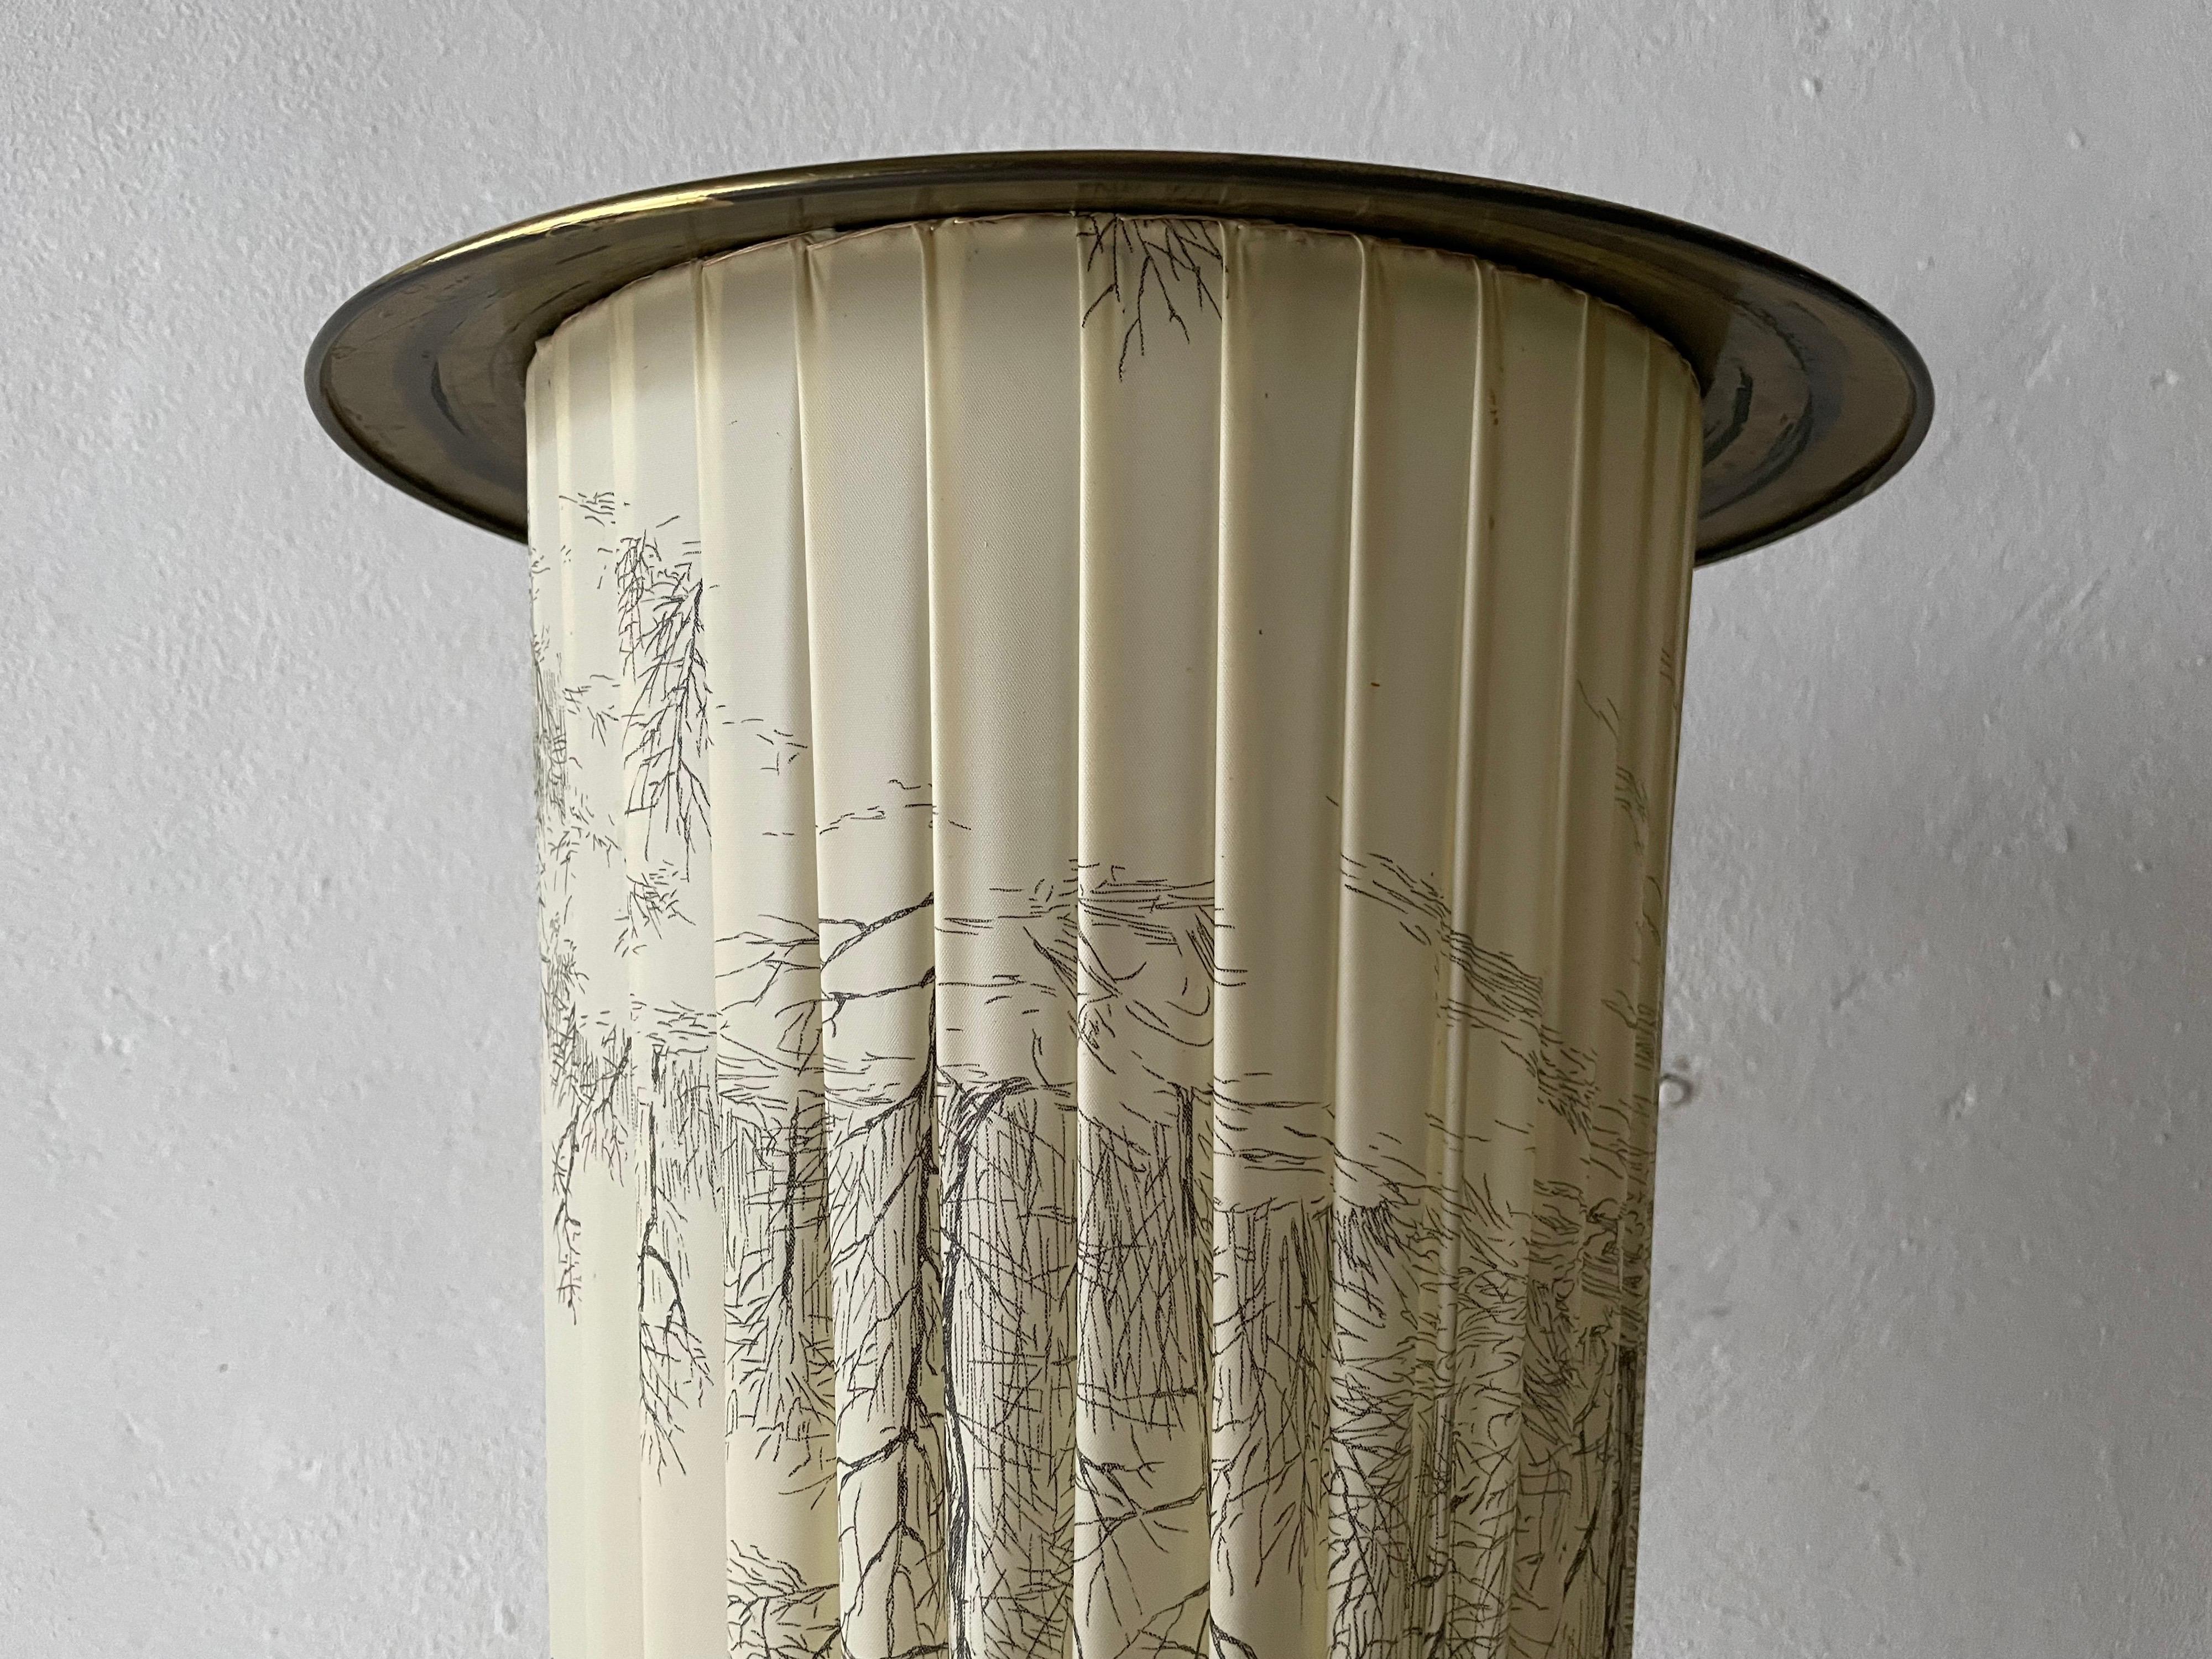 Mid-Century Modern Brass and Illustrated Fabric Floor Lamp, 1950s, Germany For Sale 6